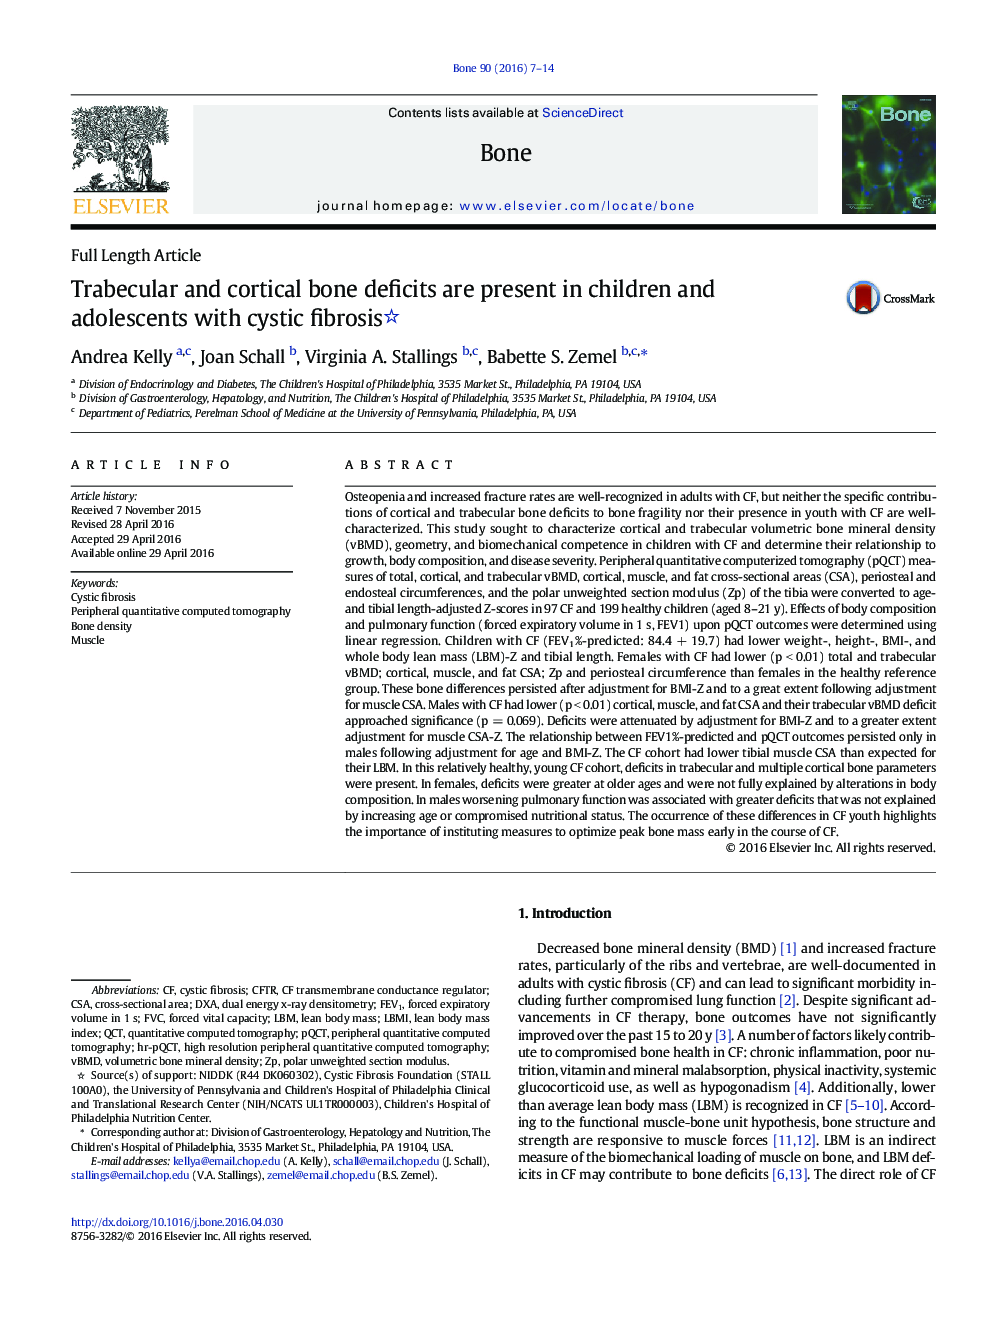 Full Length ArticleTrabecular and cortical bone deficits are present in children and adolescents with cystic fibrosis